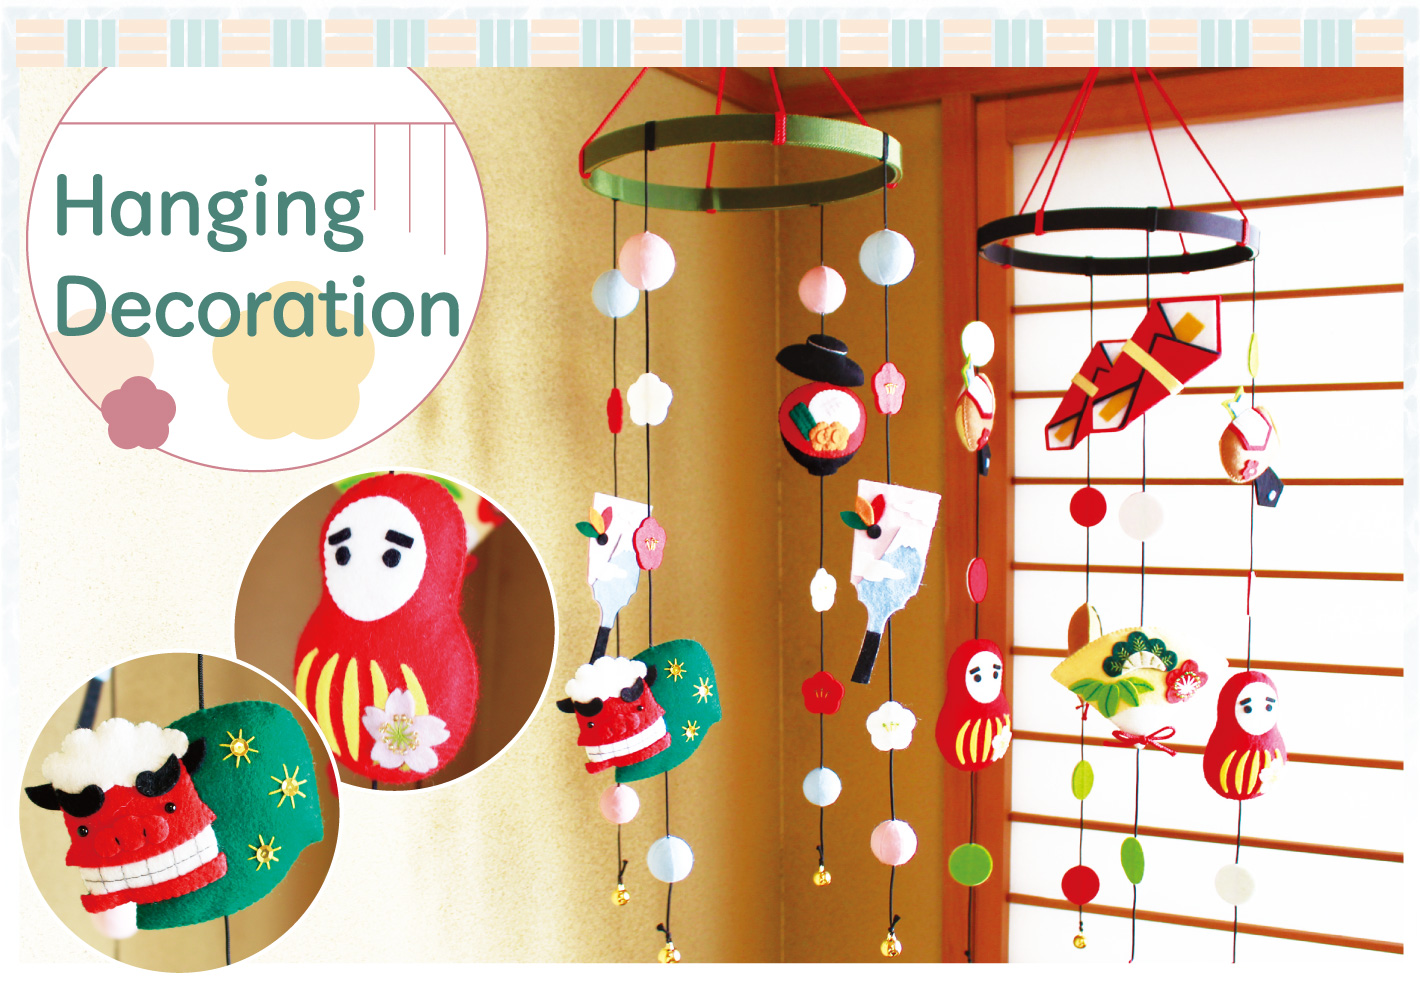 Hanging decorations with felt